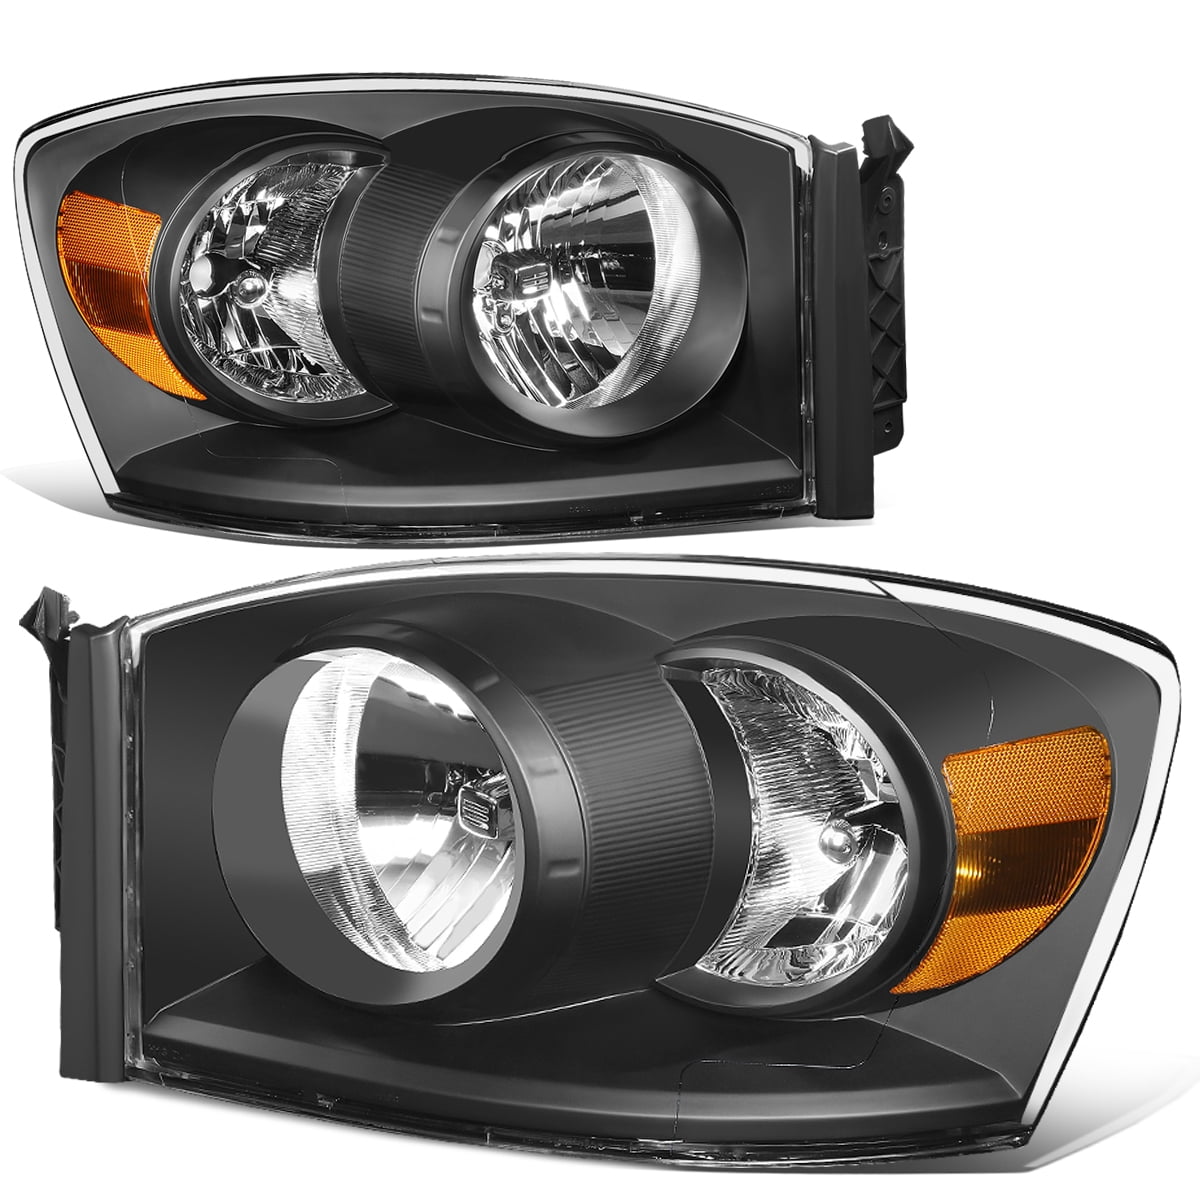 PAIR BLACK AMBER SIDE FRONT DRIVING HEADLIGHTS FOR 2006-2009 DODGE RAM TRUCK 